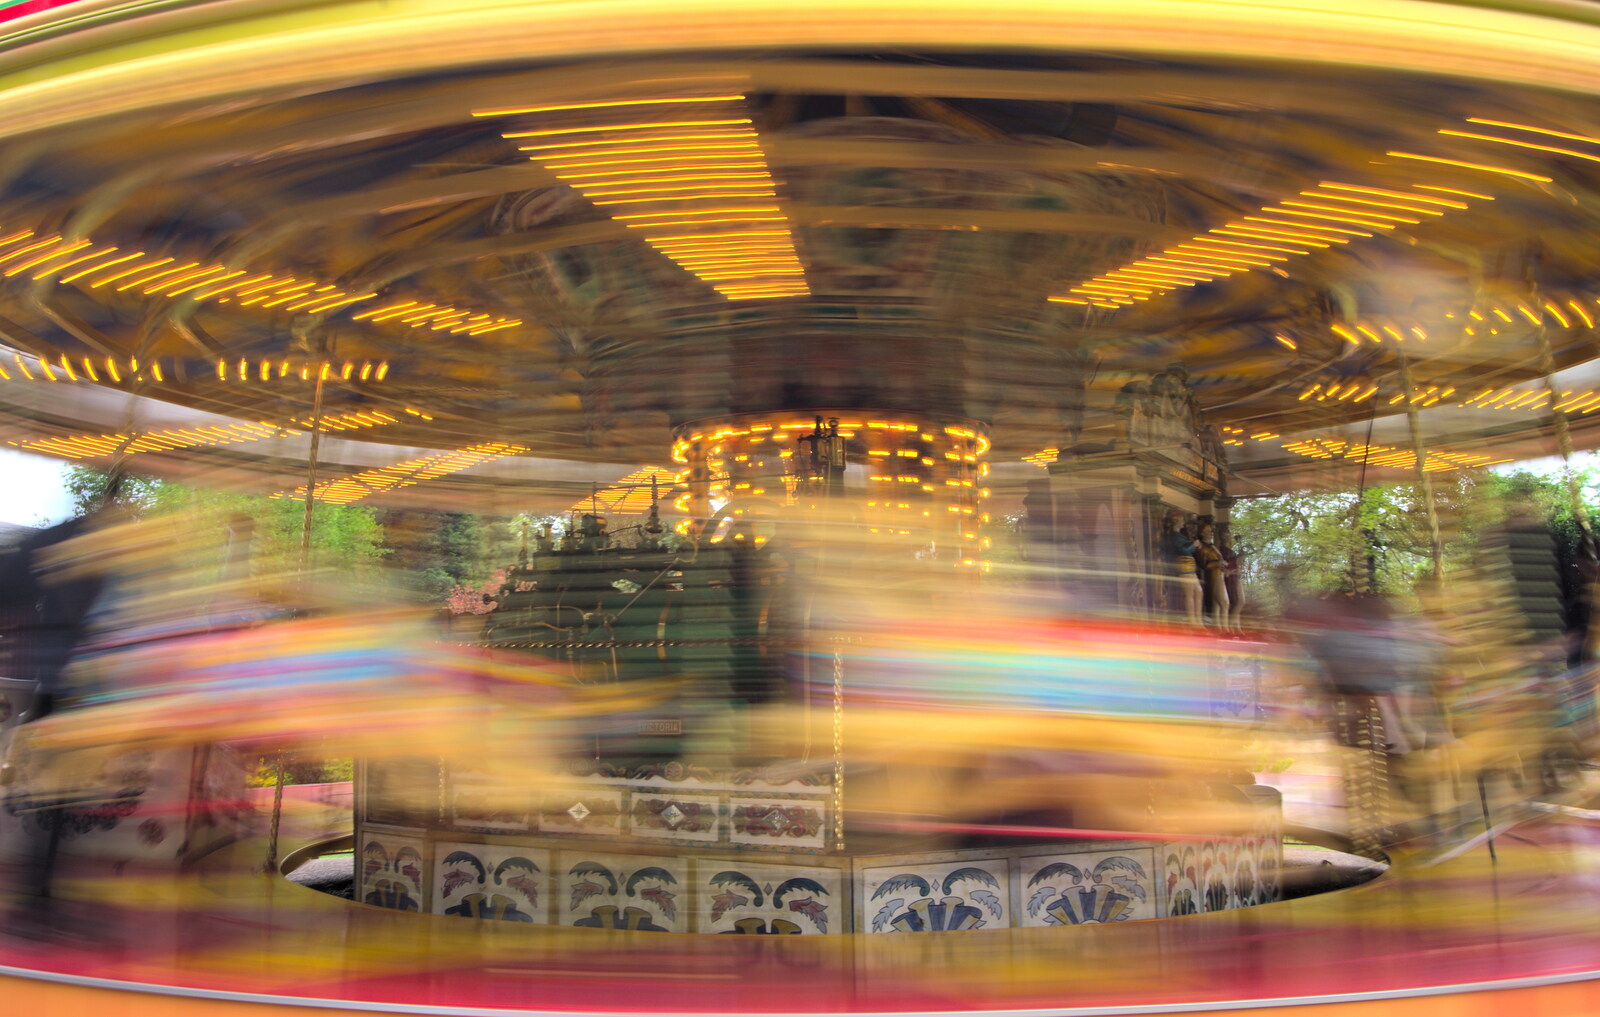 A blur of lights and wooden horses from A Day at Bressingham Steam and Gardens, Diss, Norfolk - 18th May 2013